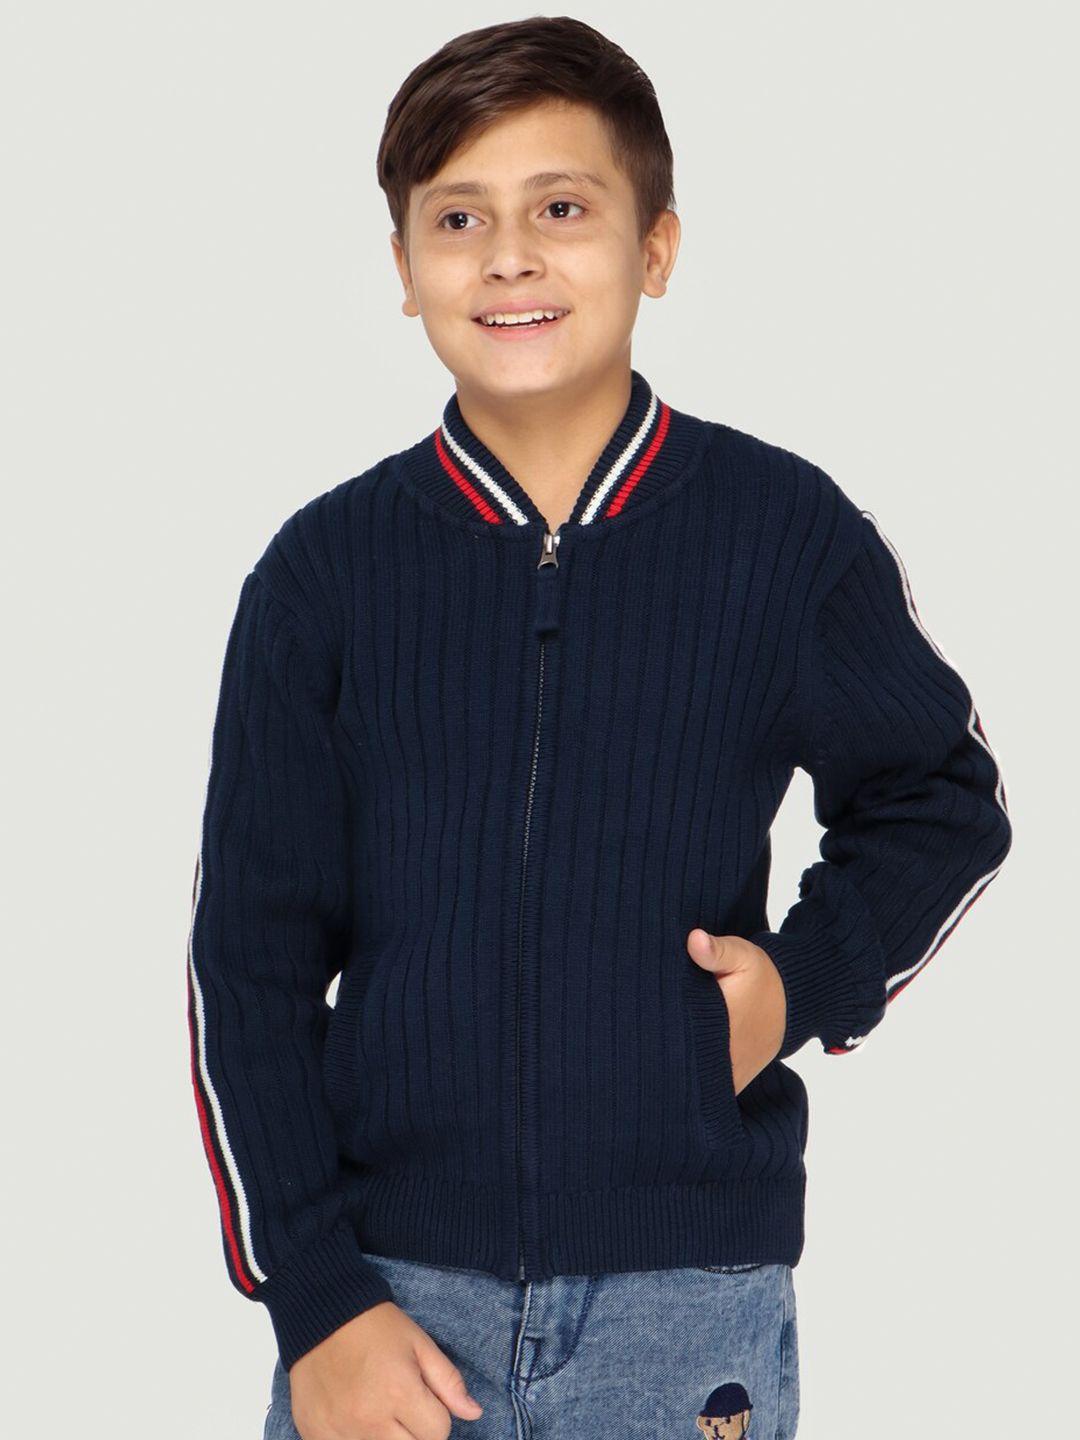 lasnak boys navy blue & red cotton pullover sweater